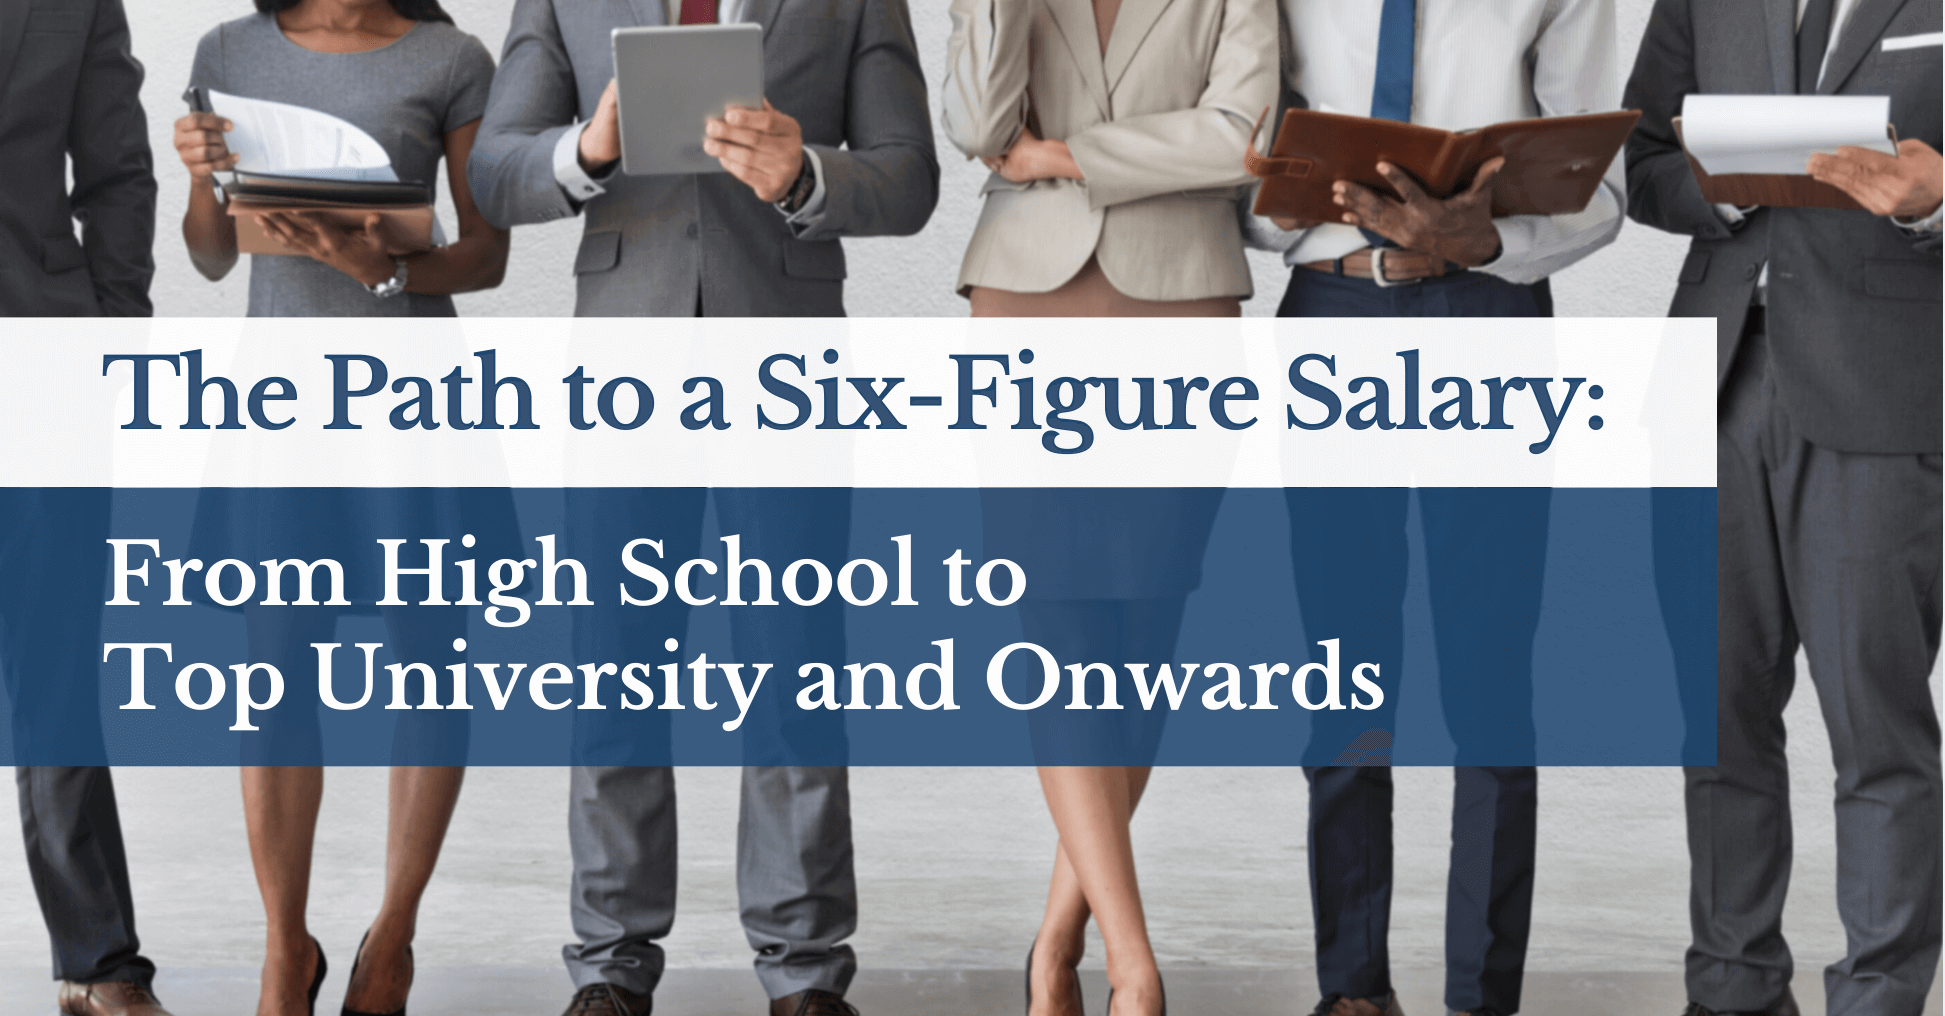 The Path to a Six-Figure Salary: From High School to Top University and Onwards